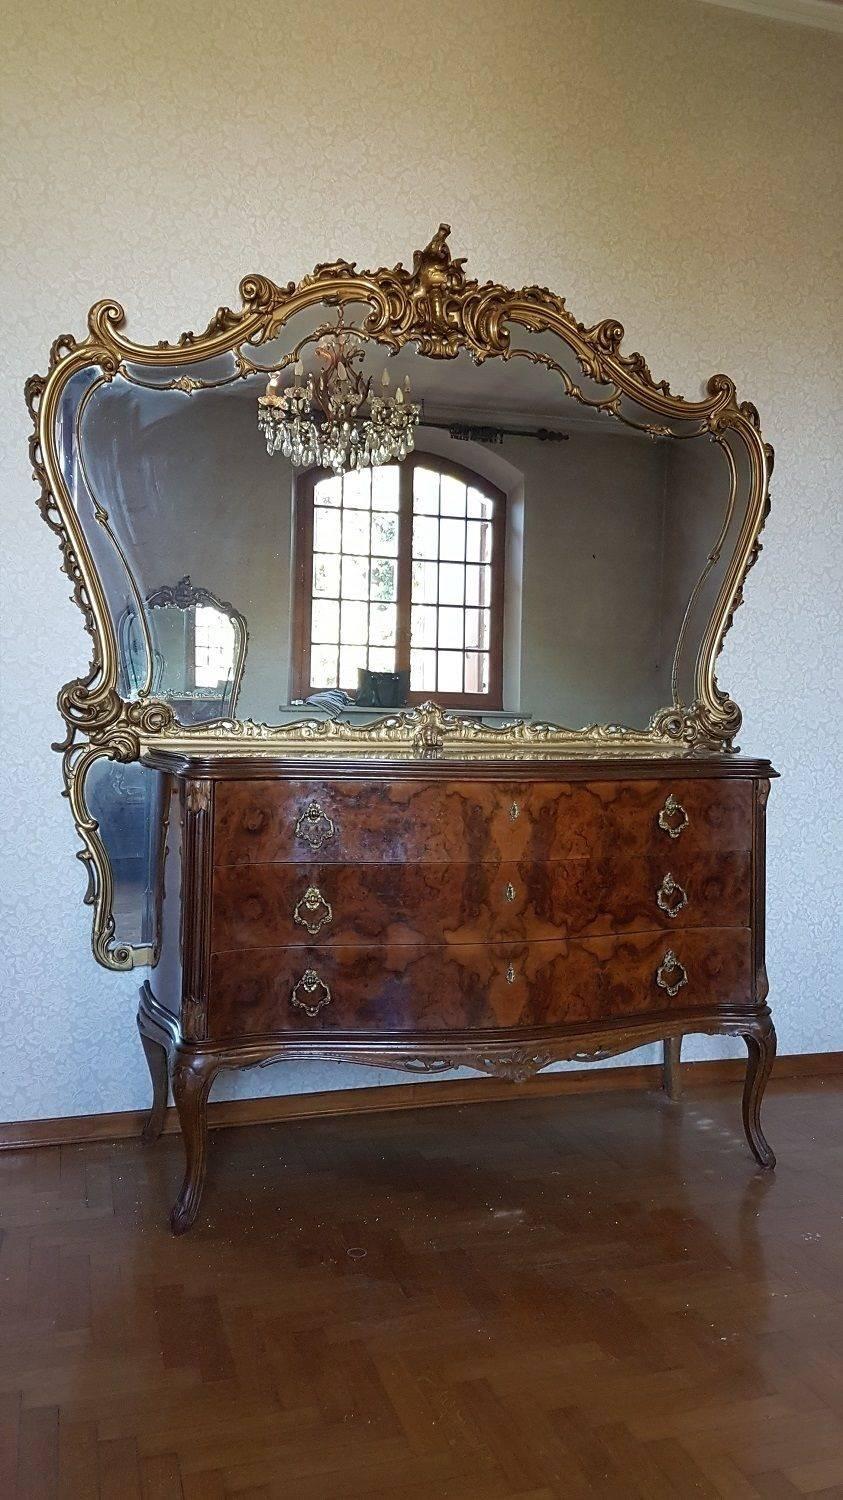 not included chandelier and sconces that there are photos
This superb bedroom set comes from a noble Italian family
Completely in walnut with Chippendale line rich and very close to the best Baroque Italian. Treated in detail definitely the